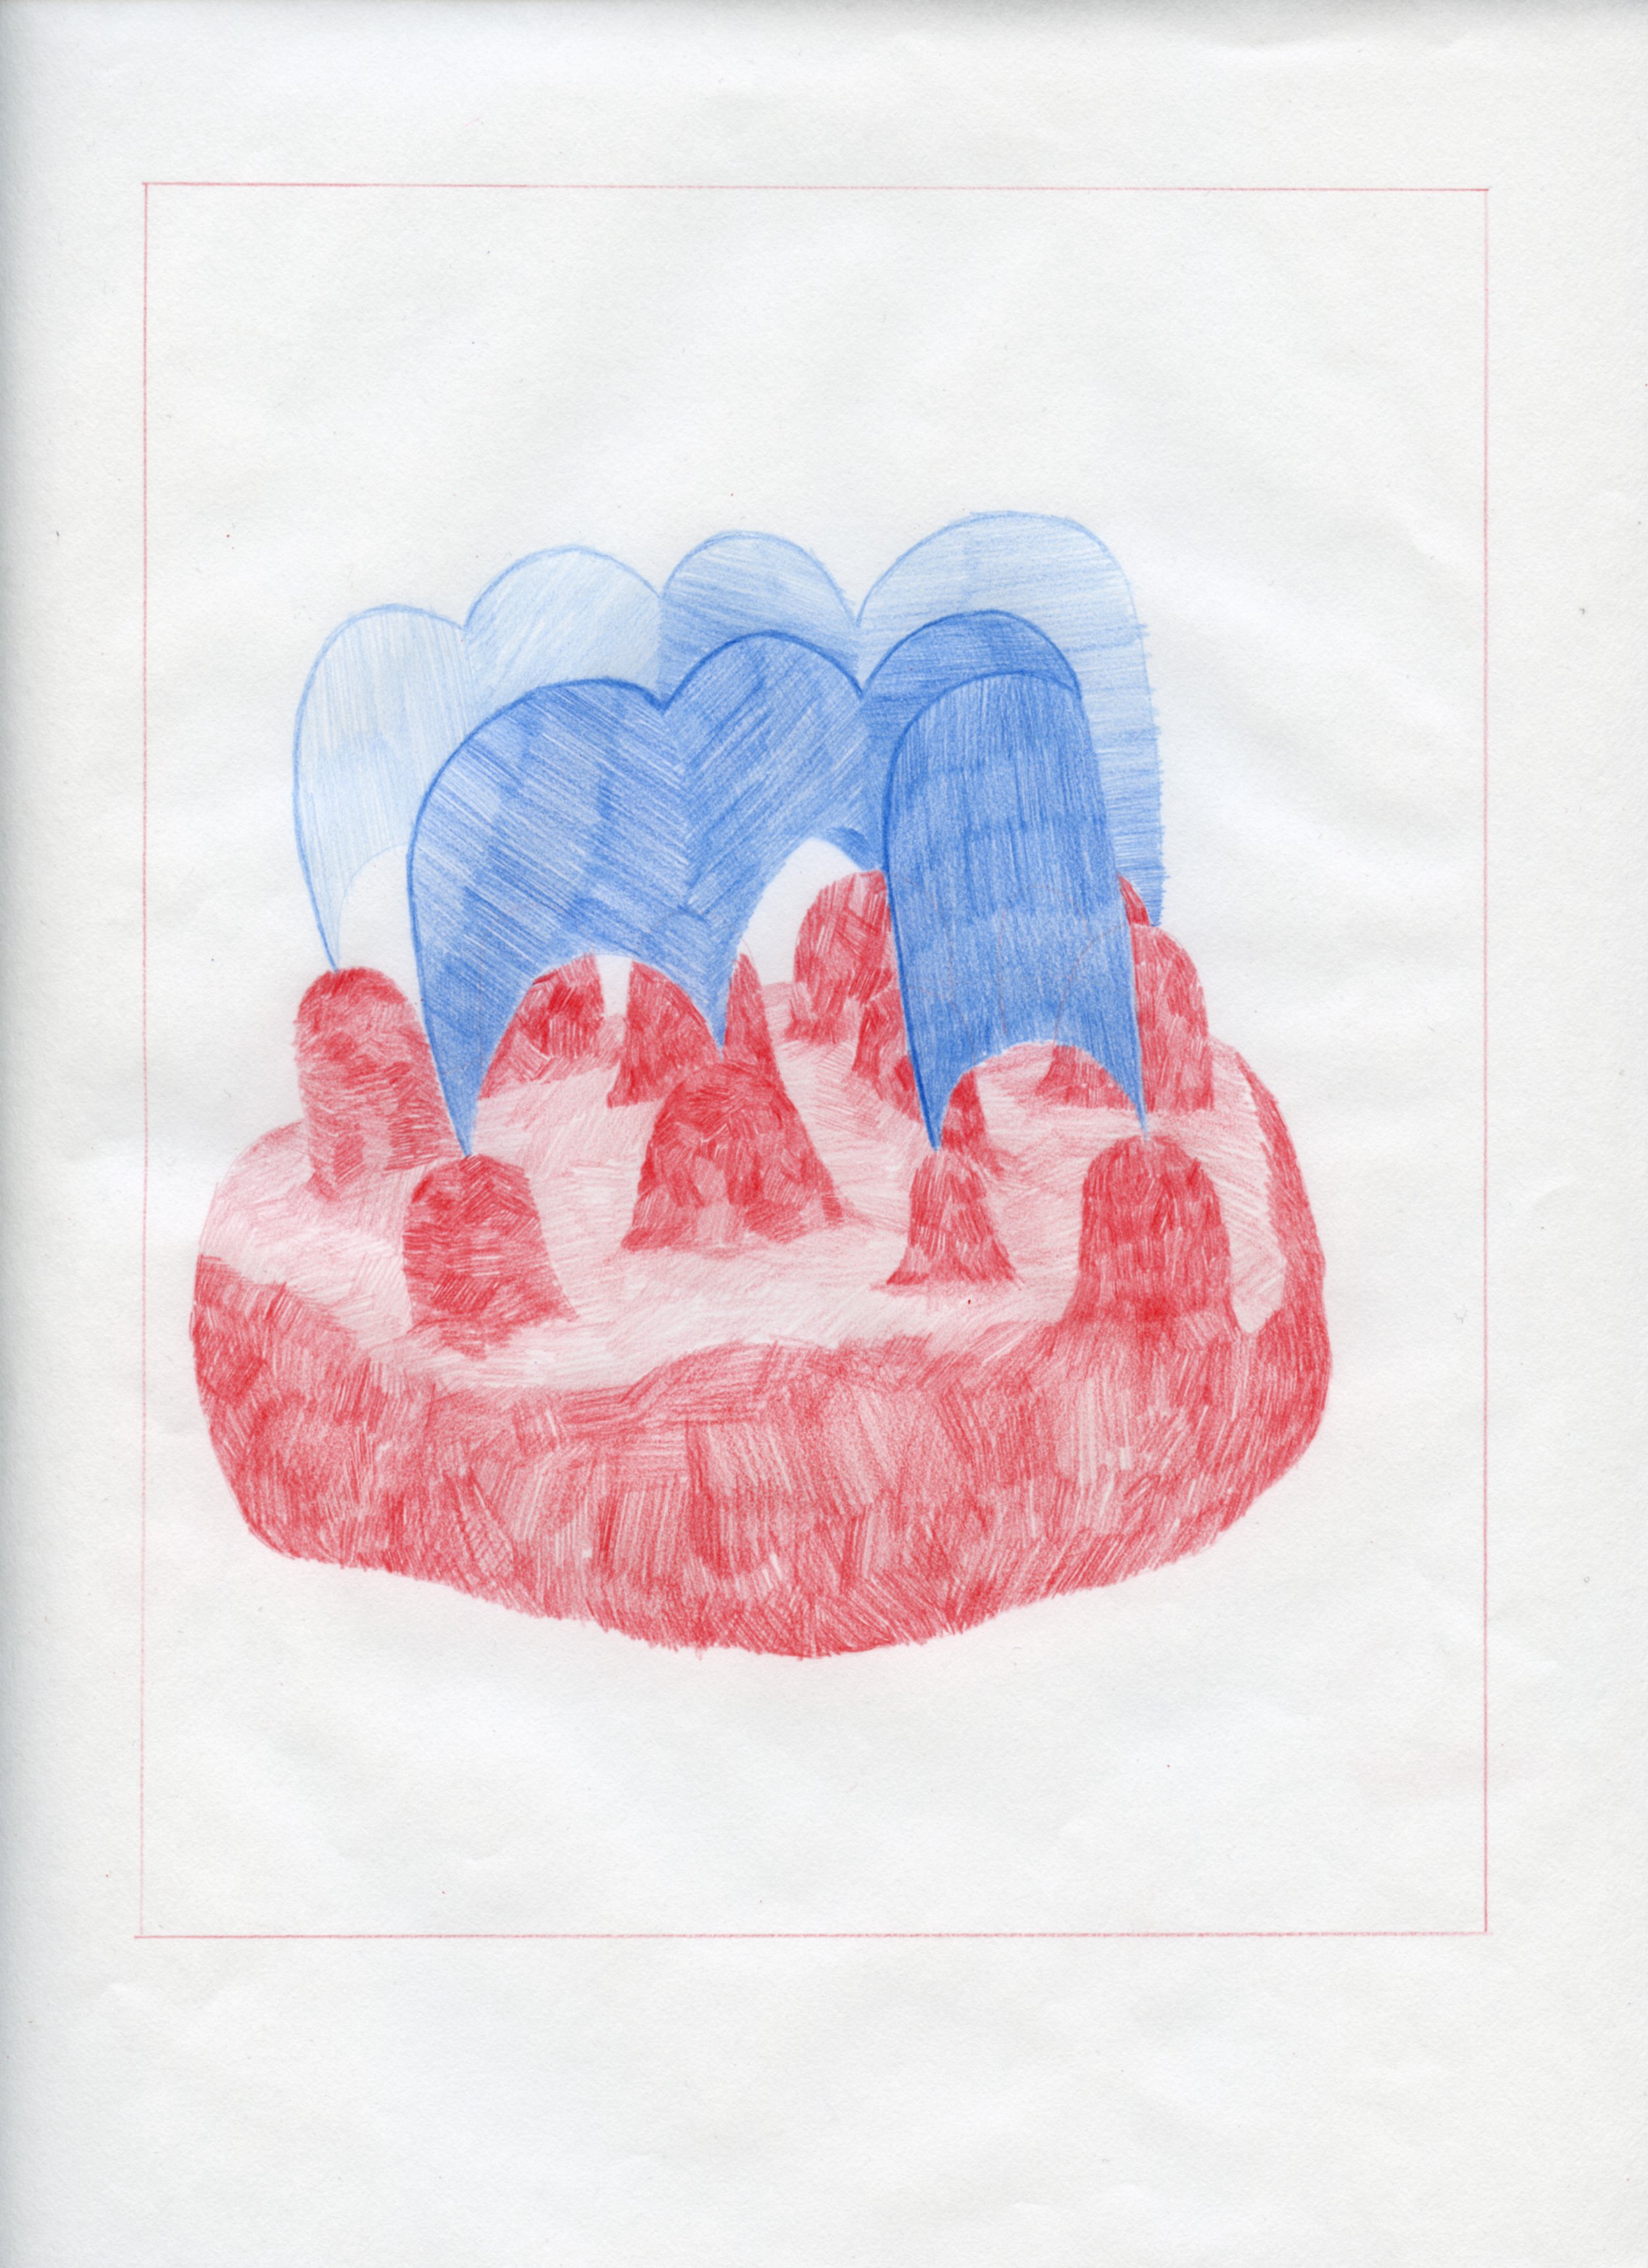  Workplace Drawing #32, 2021, Red and Blue Graphite on Bond Paper, 9”x 12”. 